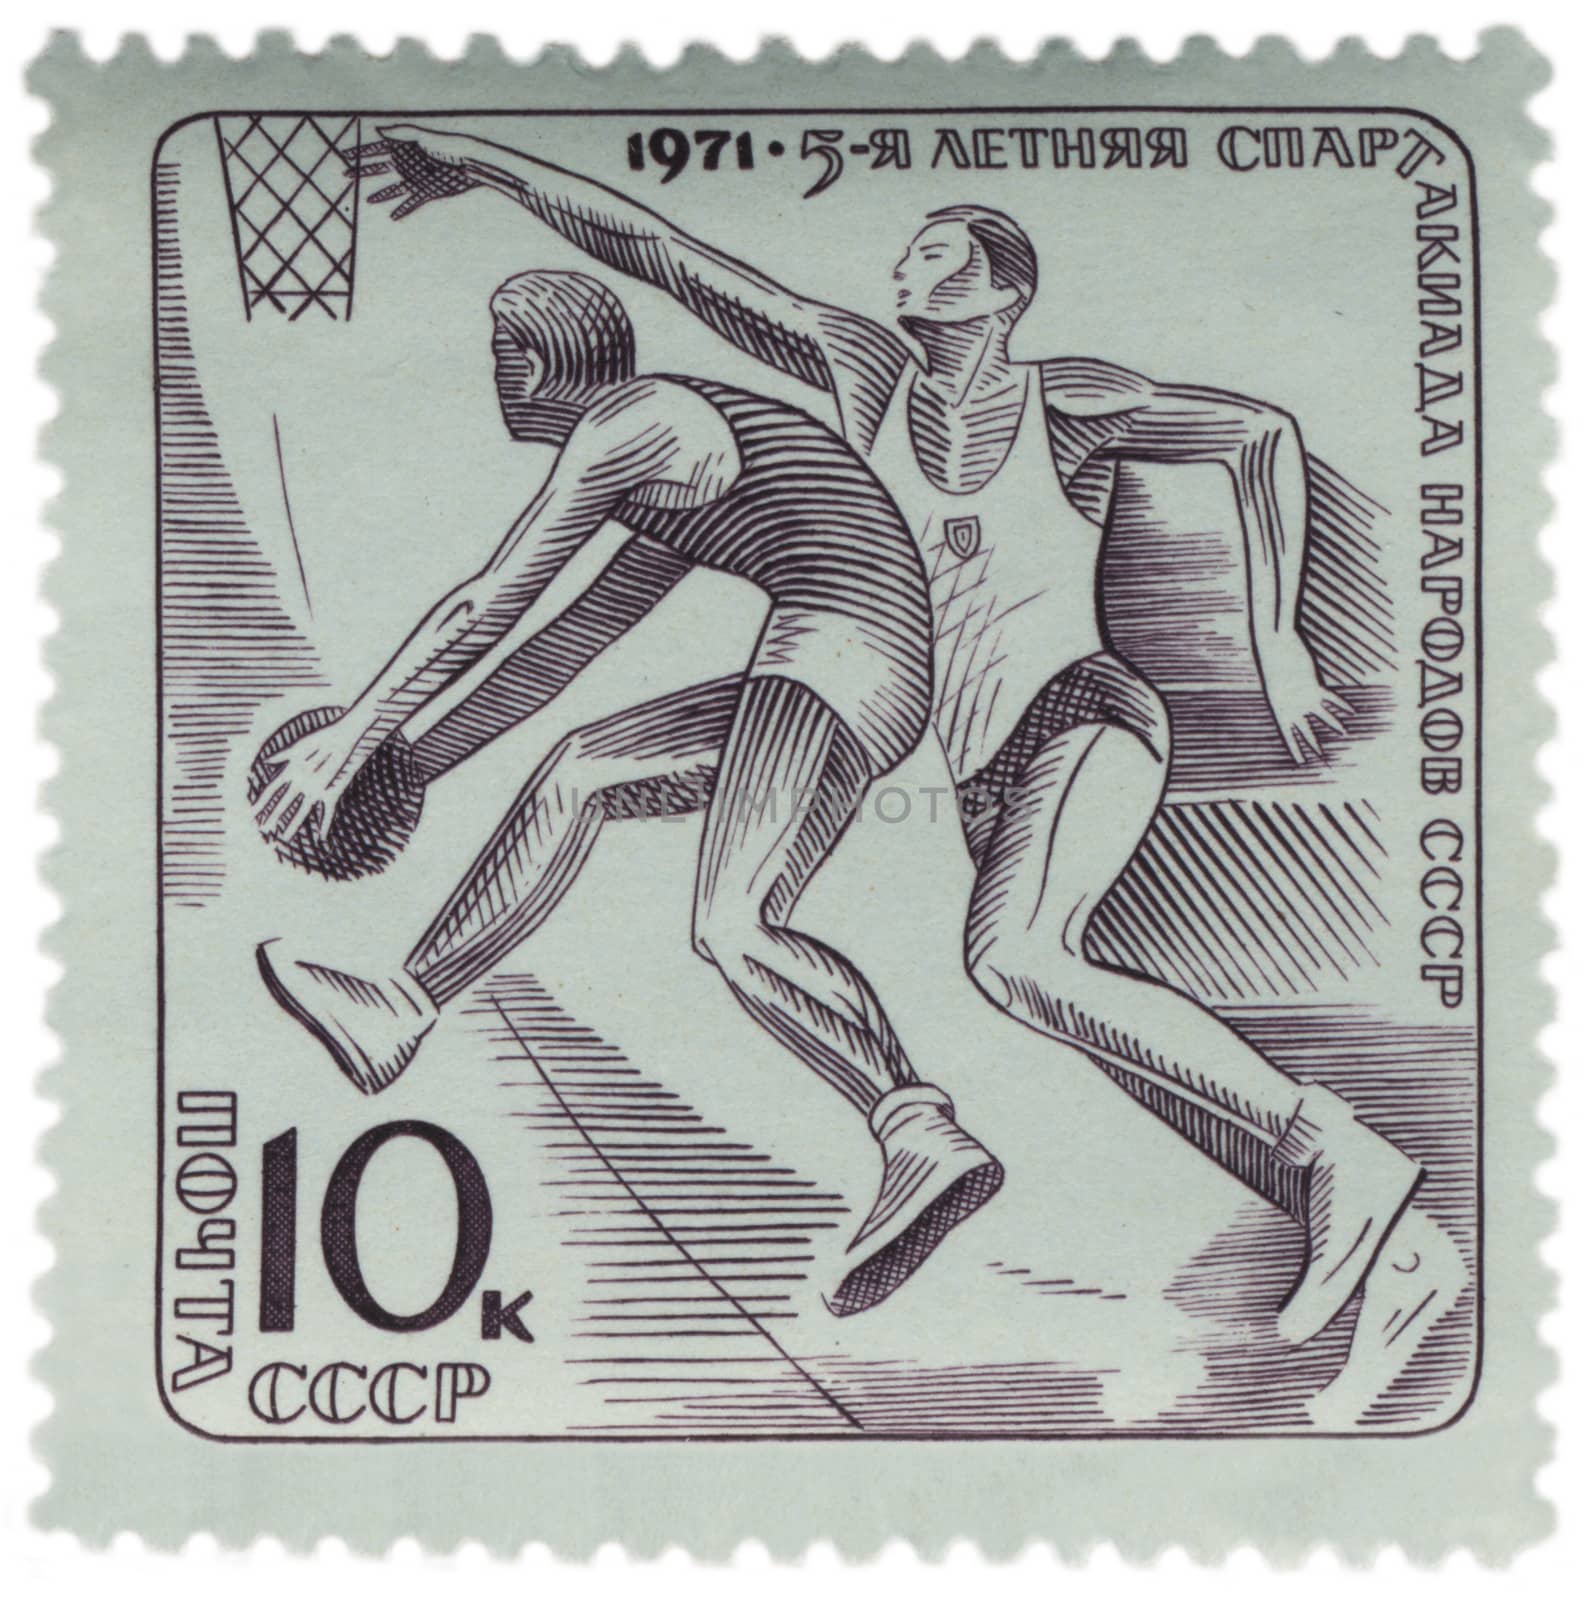 USSR - CIRCA 1971: A stamp printed in USSR shows basketball, series, circa 1971